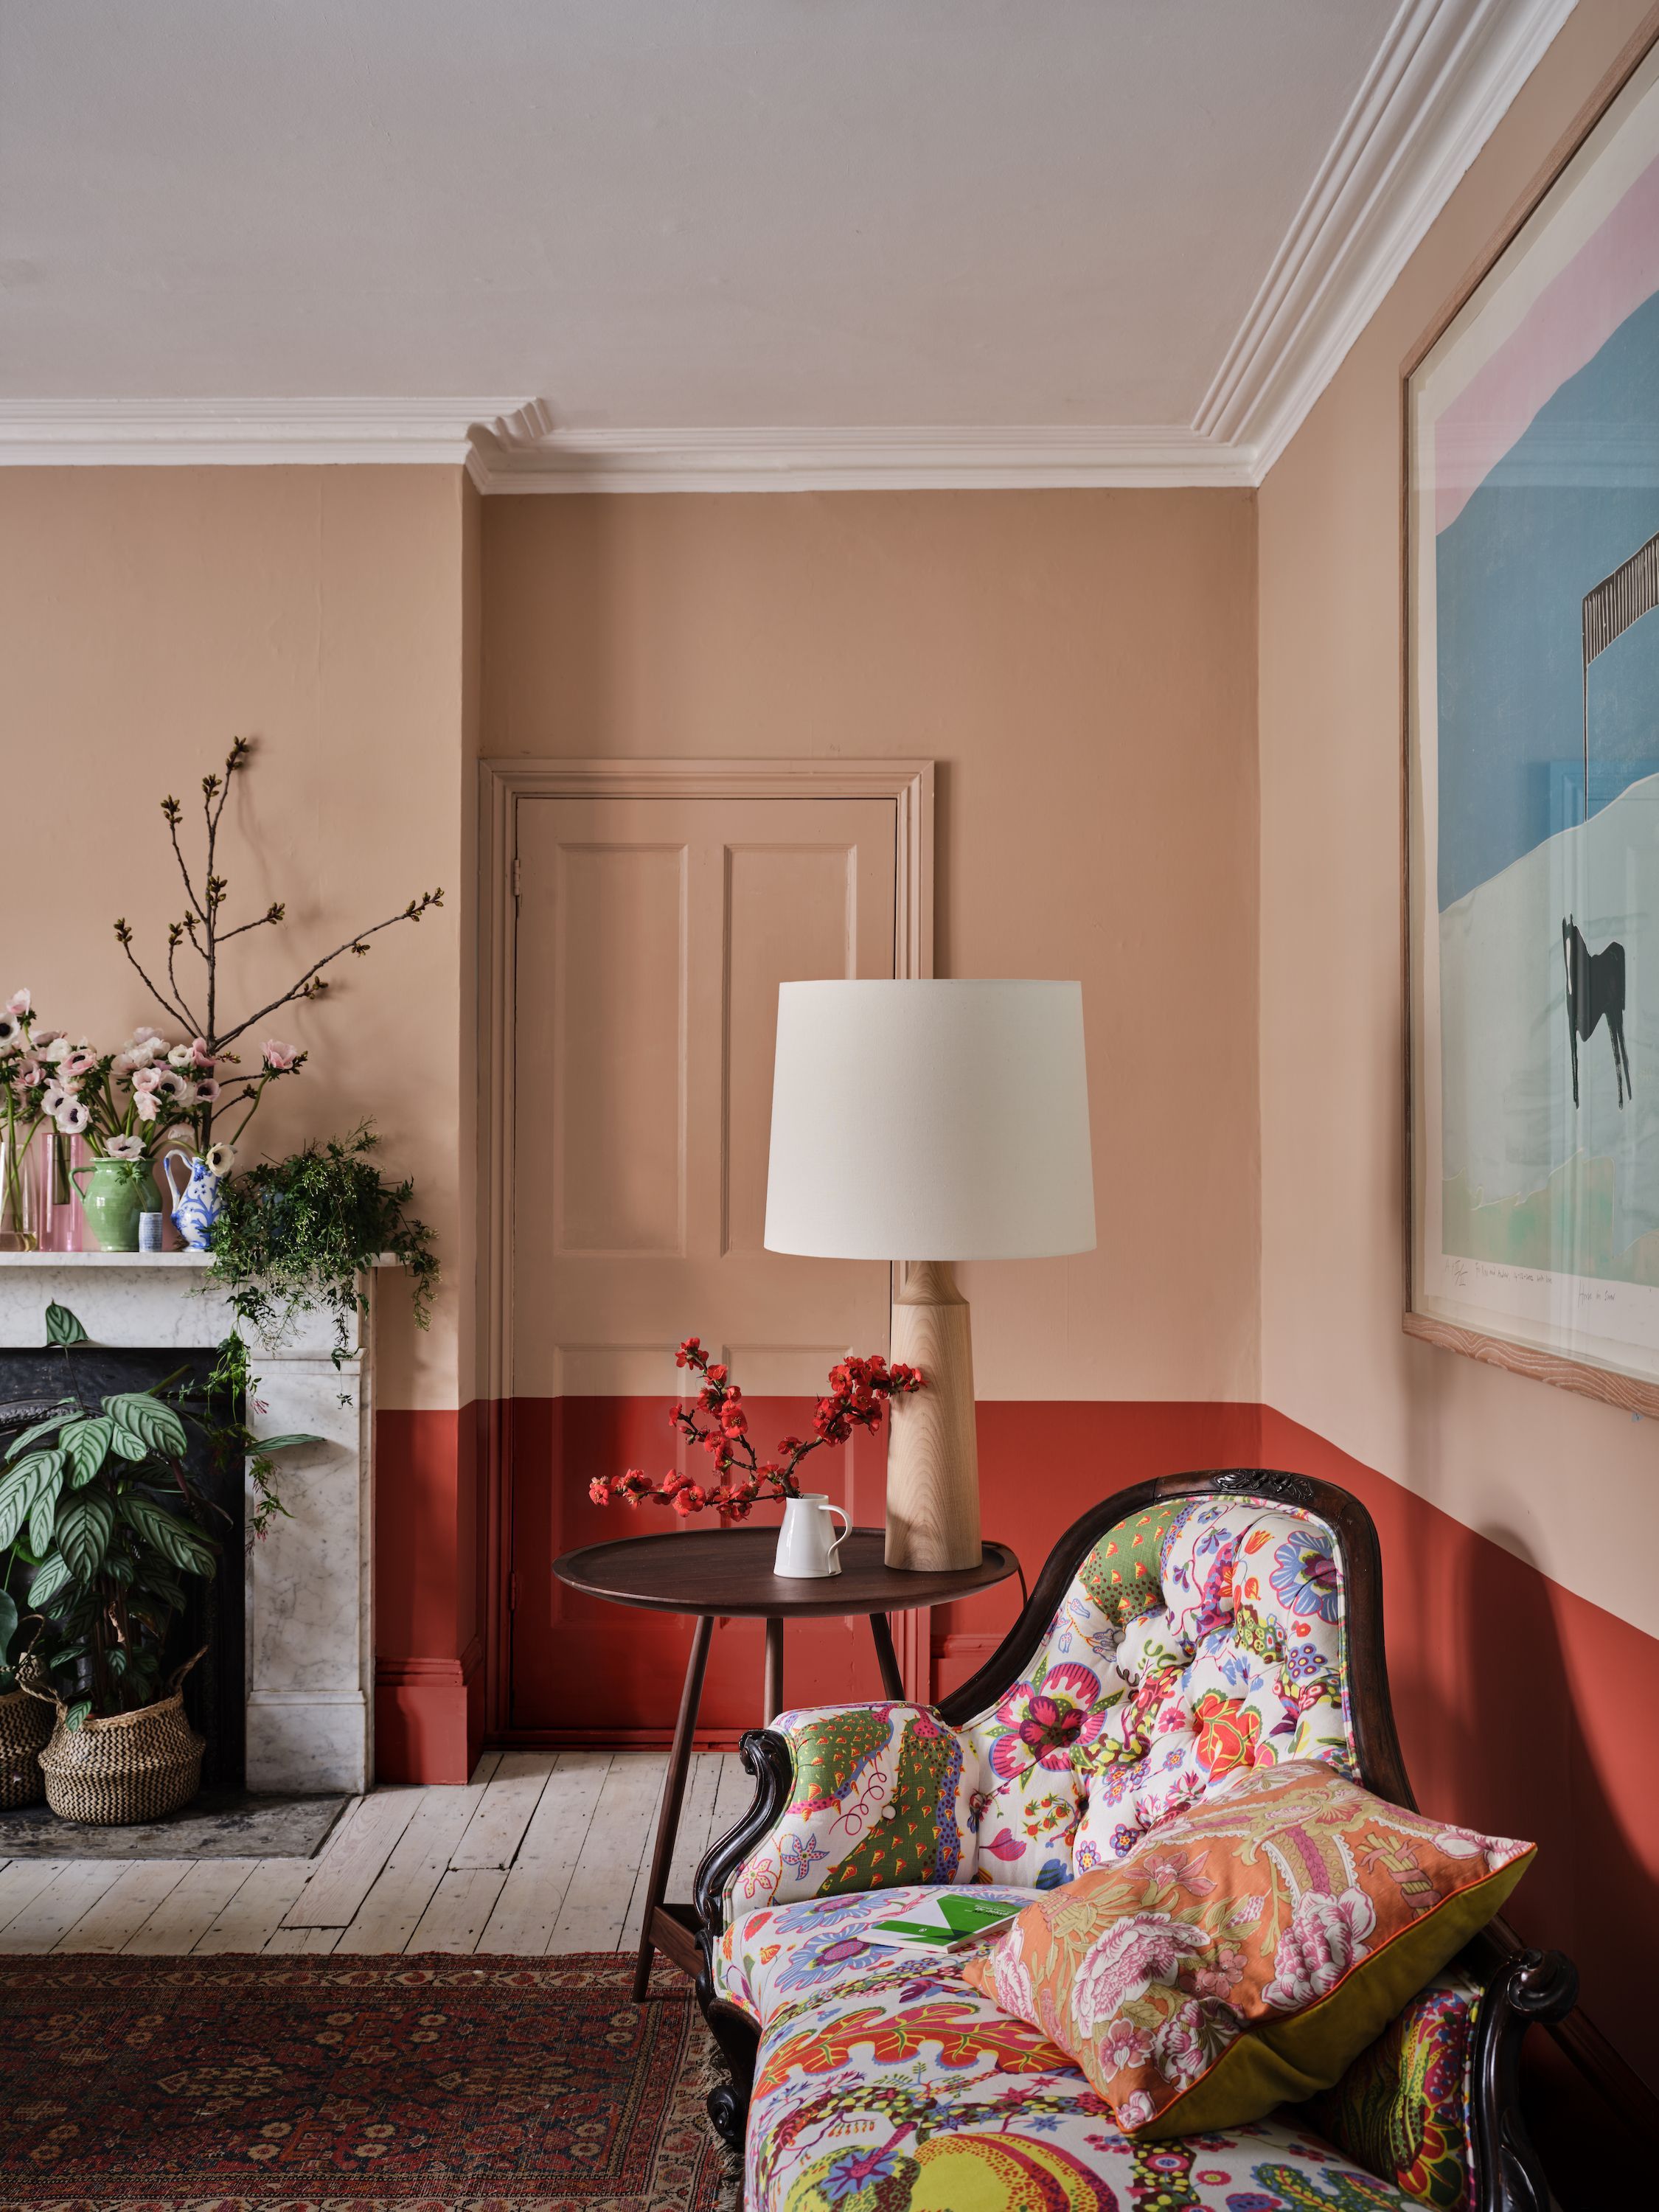 Farrow and Ball Colours In Real Homes: 17 Photos For Inspiration